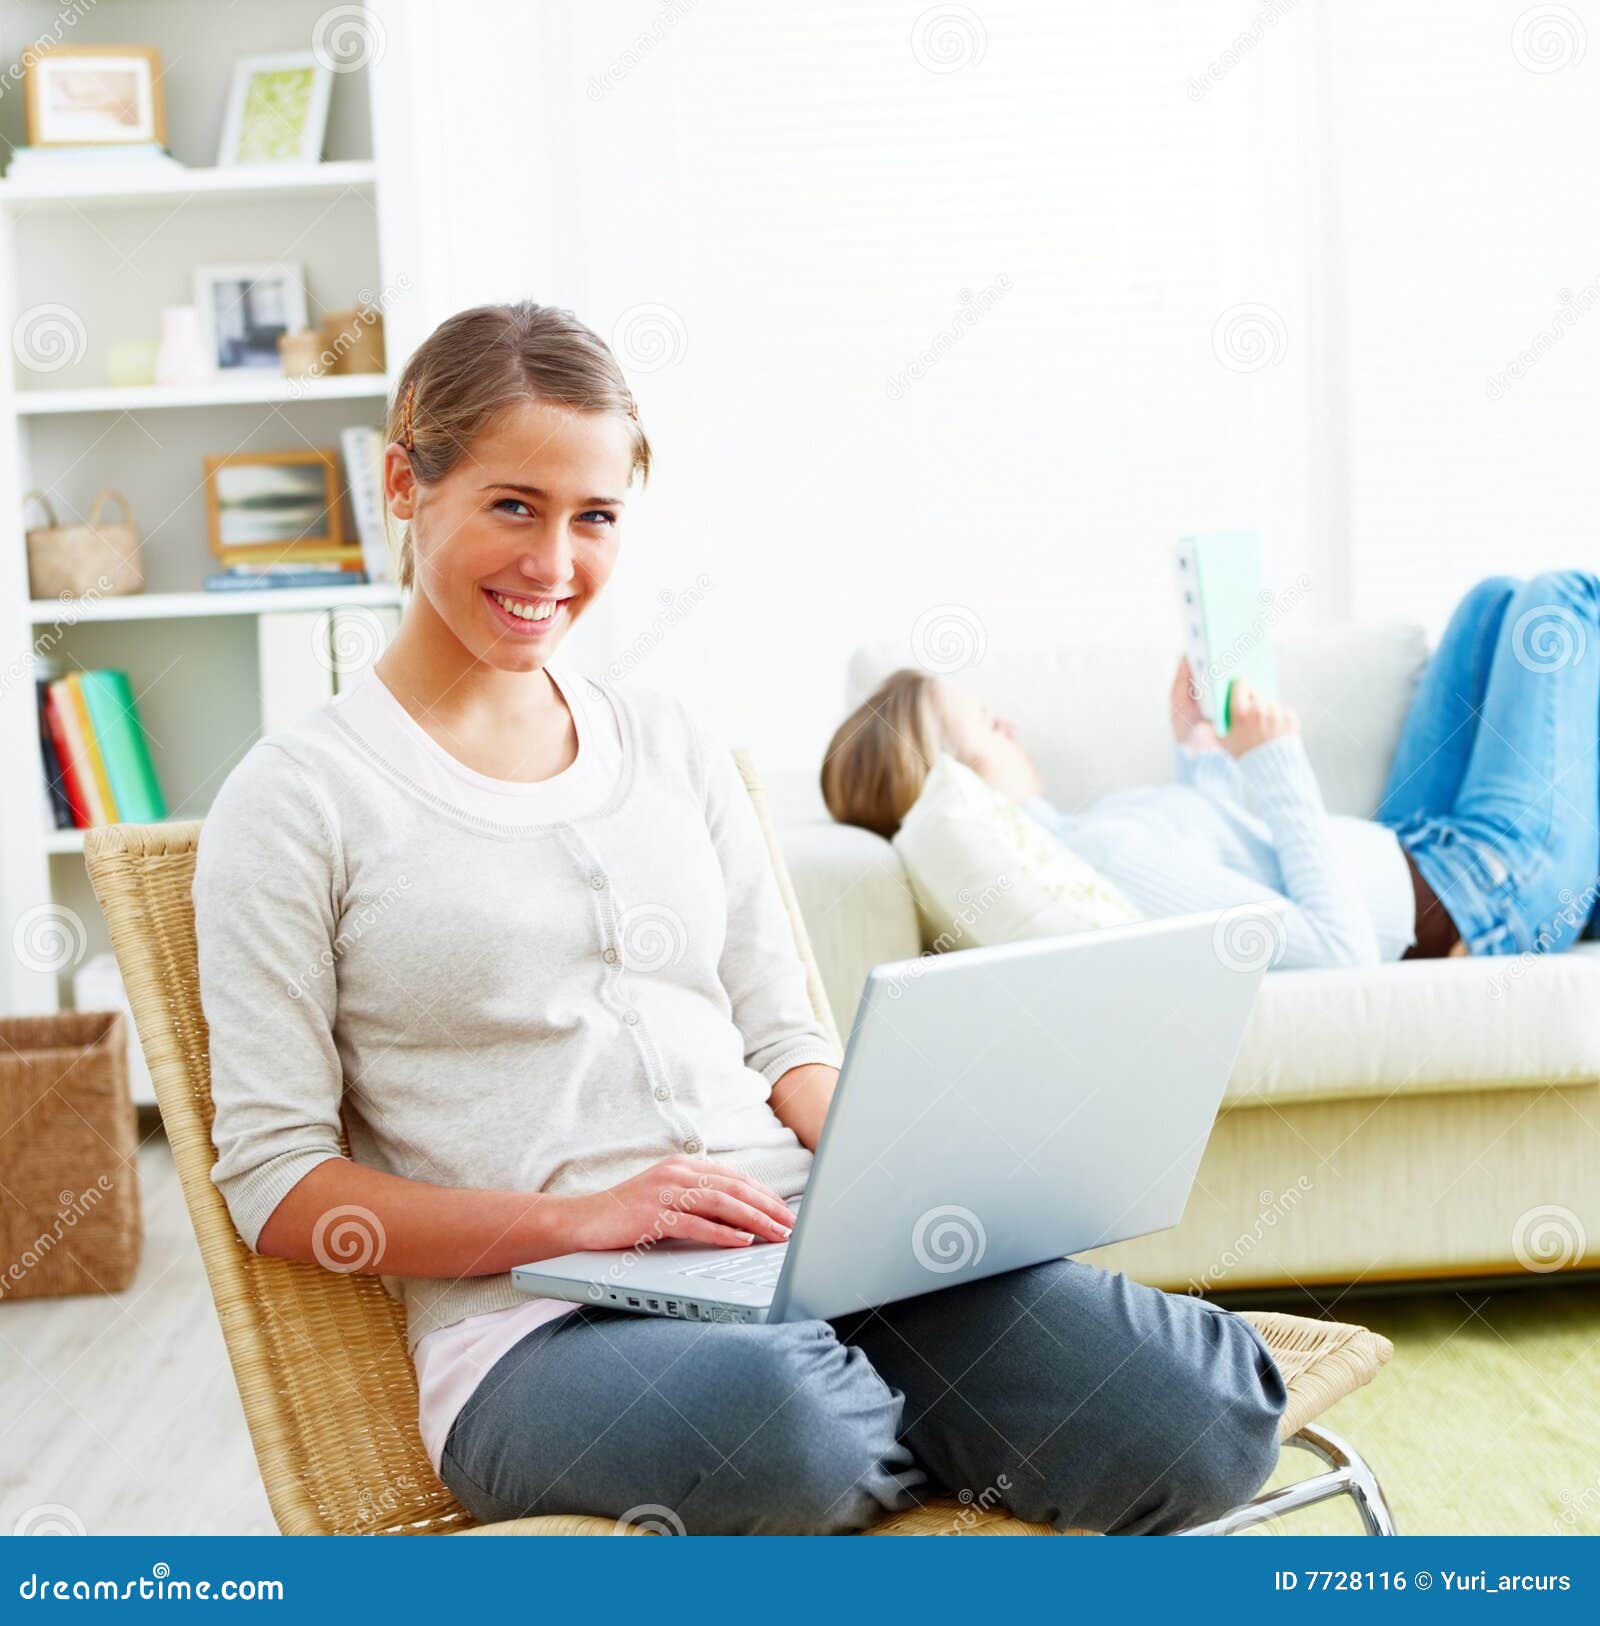 Smiling woman using laptop at home in collage dorm. Smiling woman using laptop while her friend lying on sofa reading a book